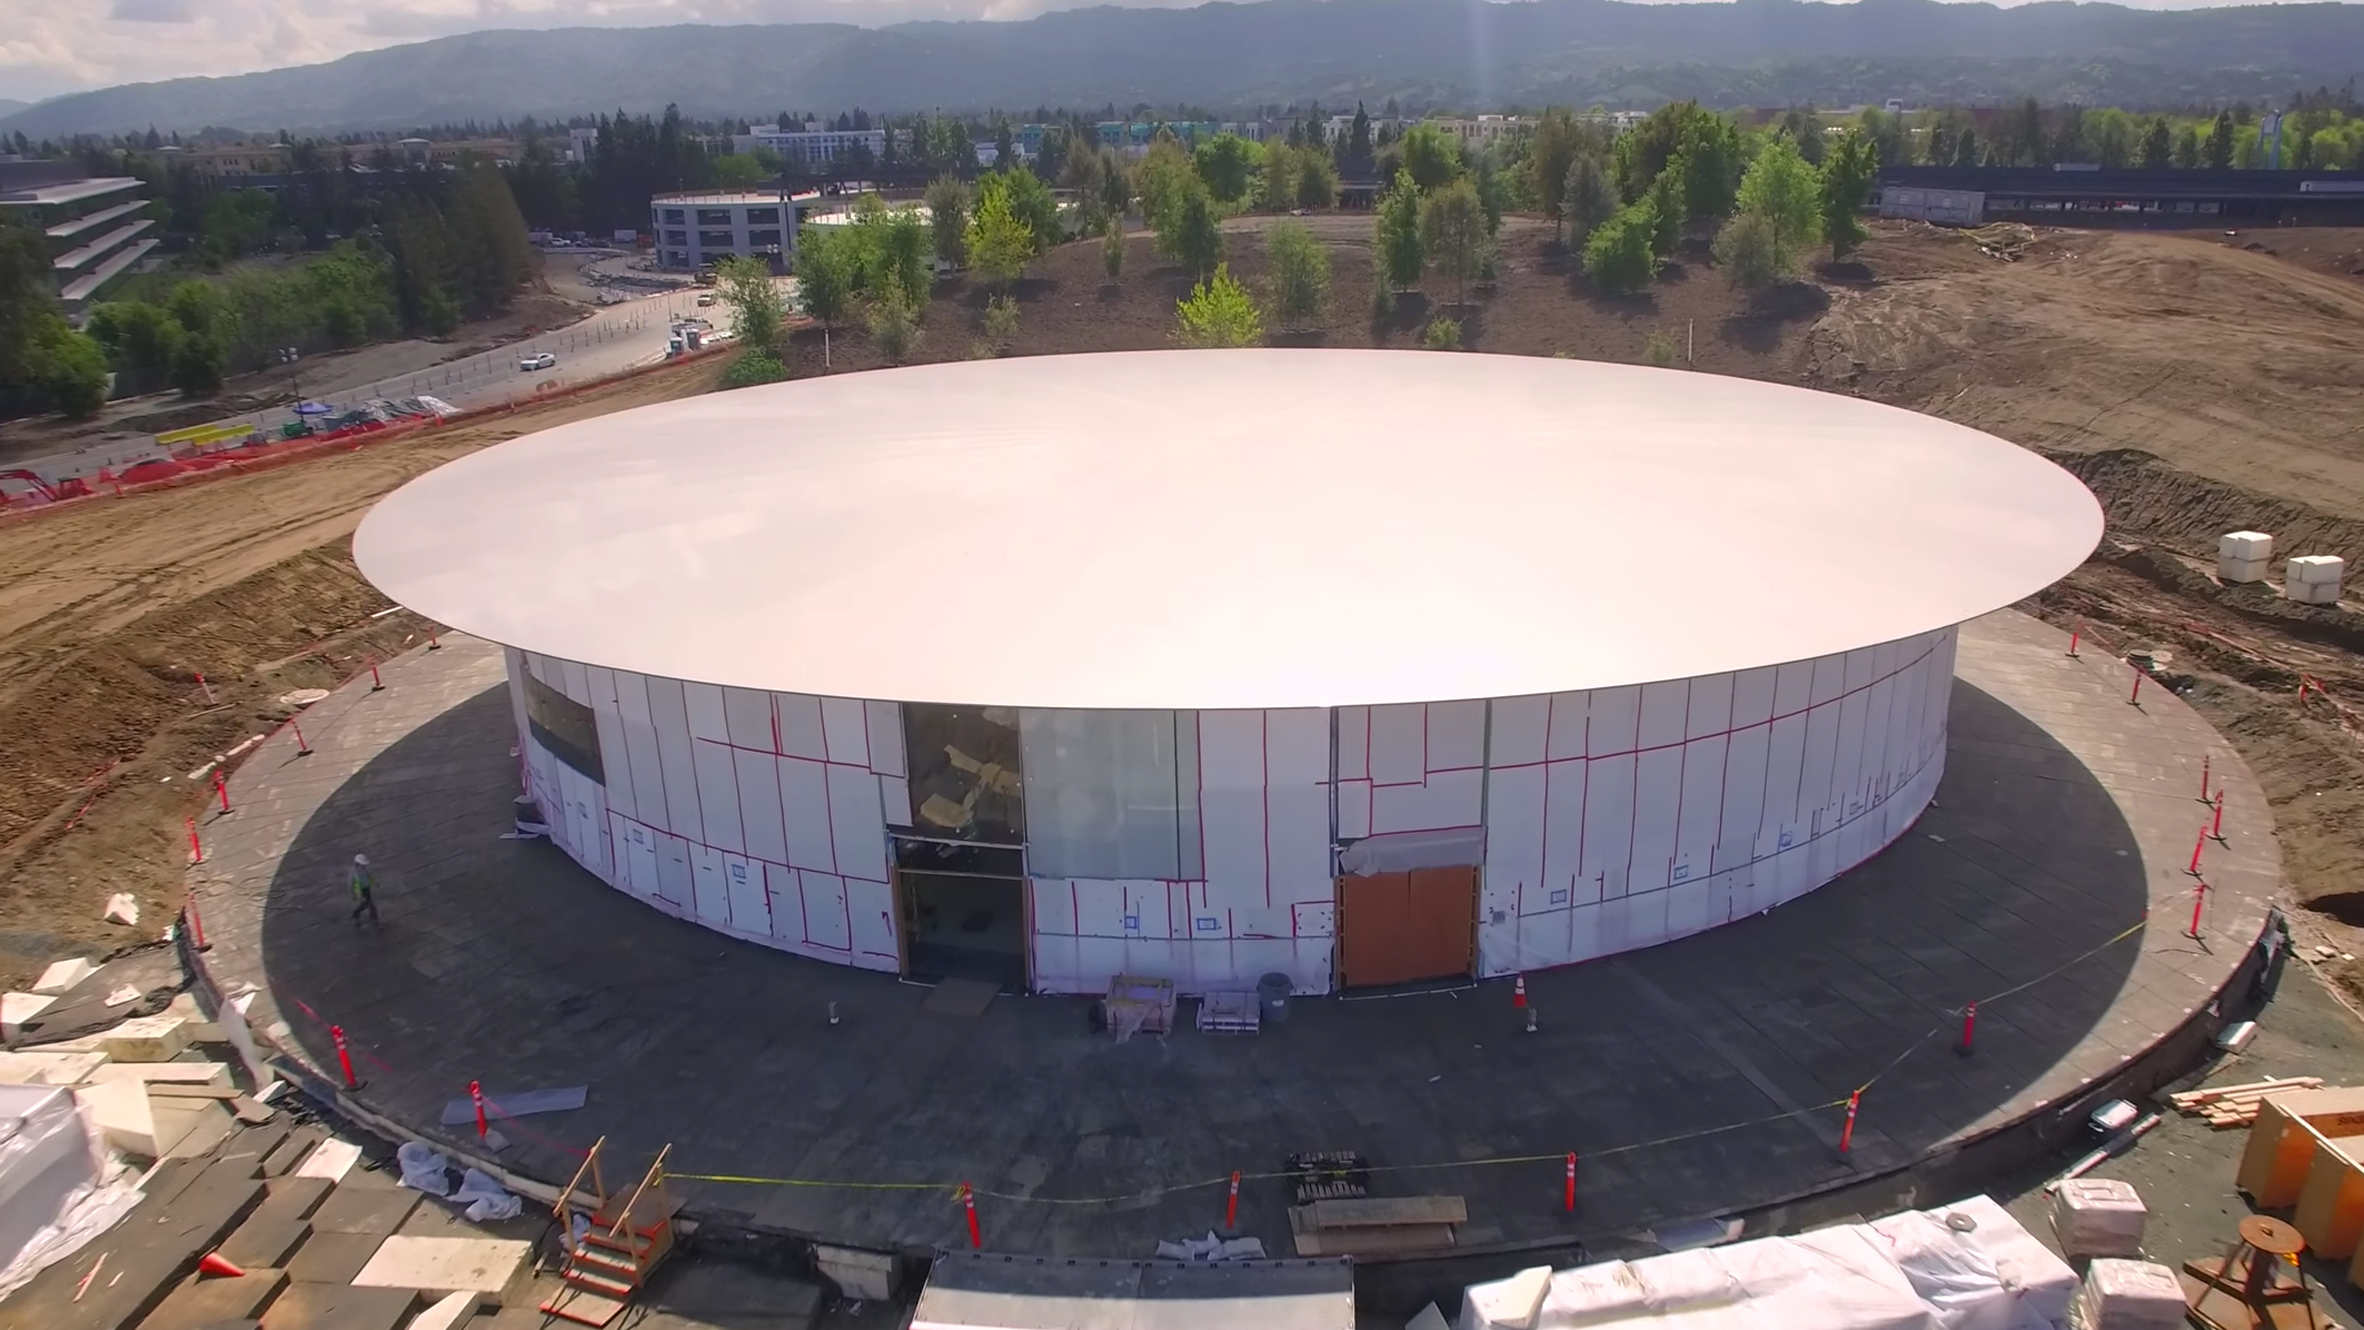 Apple Park drone footage by Matthew Roberts